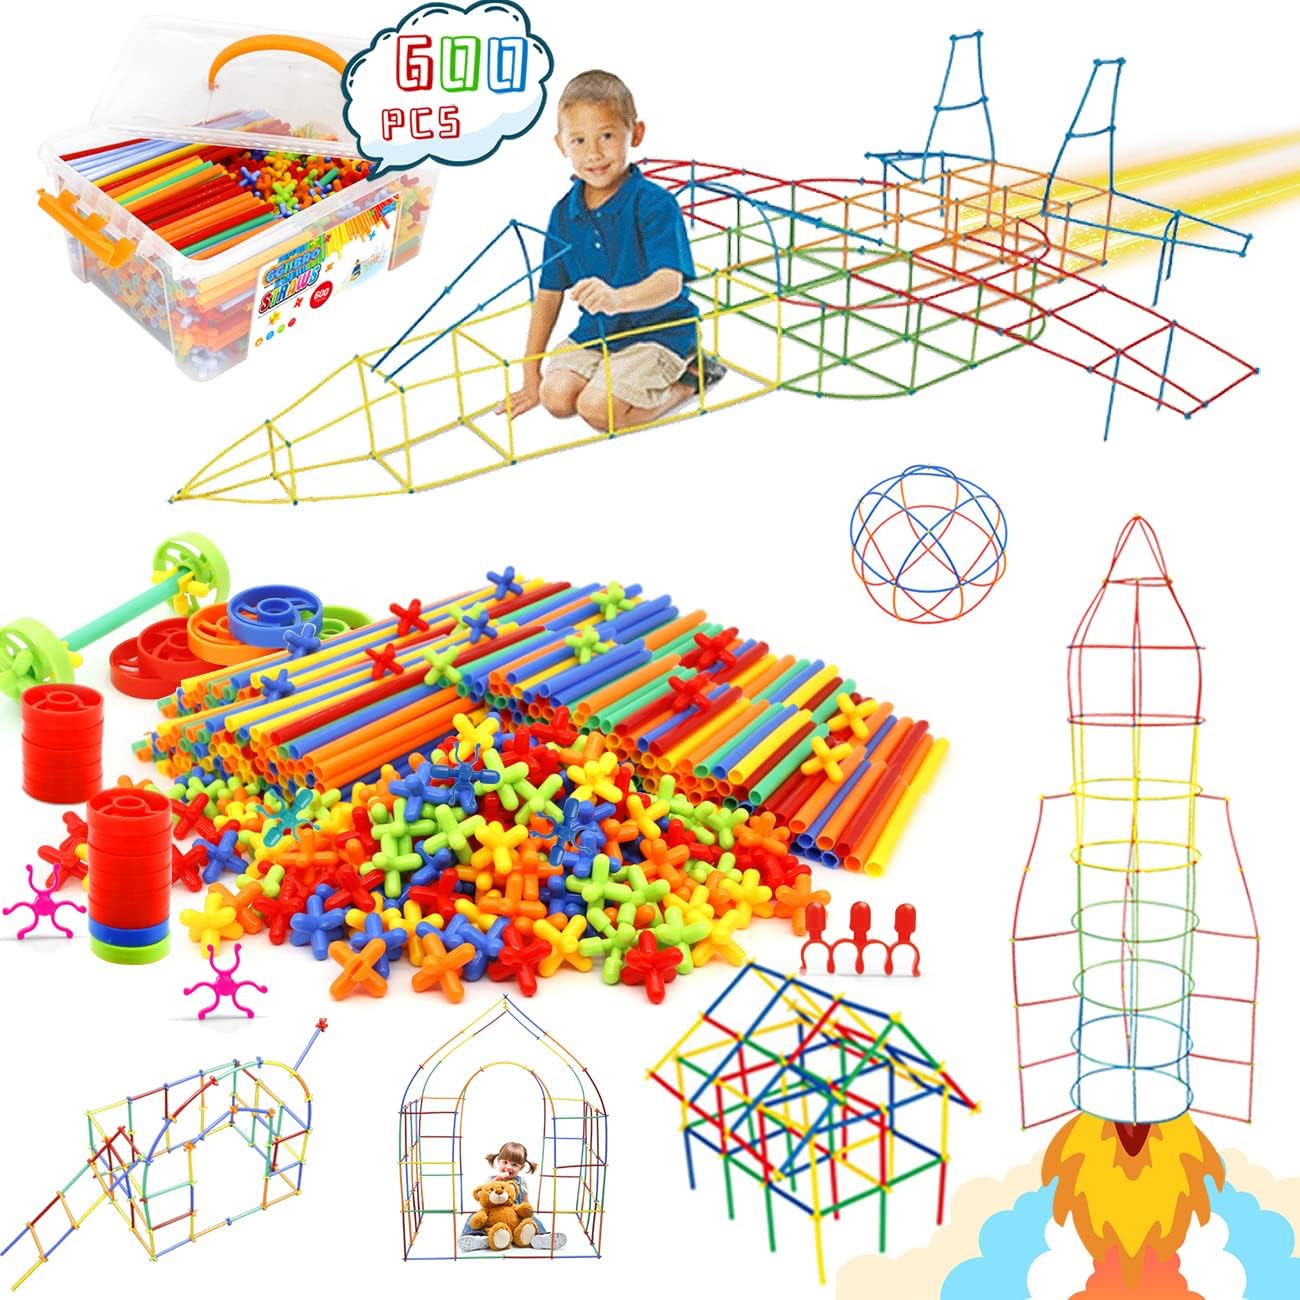 Straw Constructor Toys STEM Building Toys 600Pcs Straw Toy Interlocking Plastic Toys Engineering Toys Thin Tube Blocks Toy Educational Toy Kit for 3 4 5 6 7years Kids Toy for Boys and Girls Gift